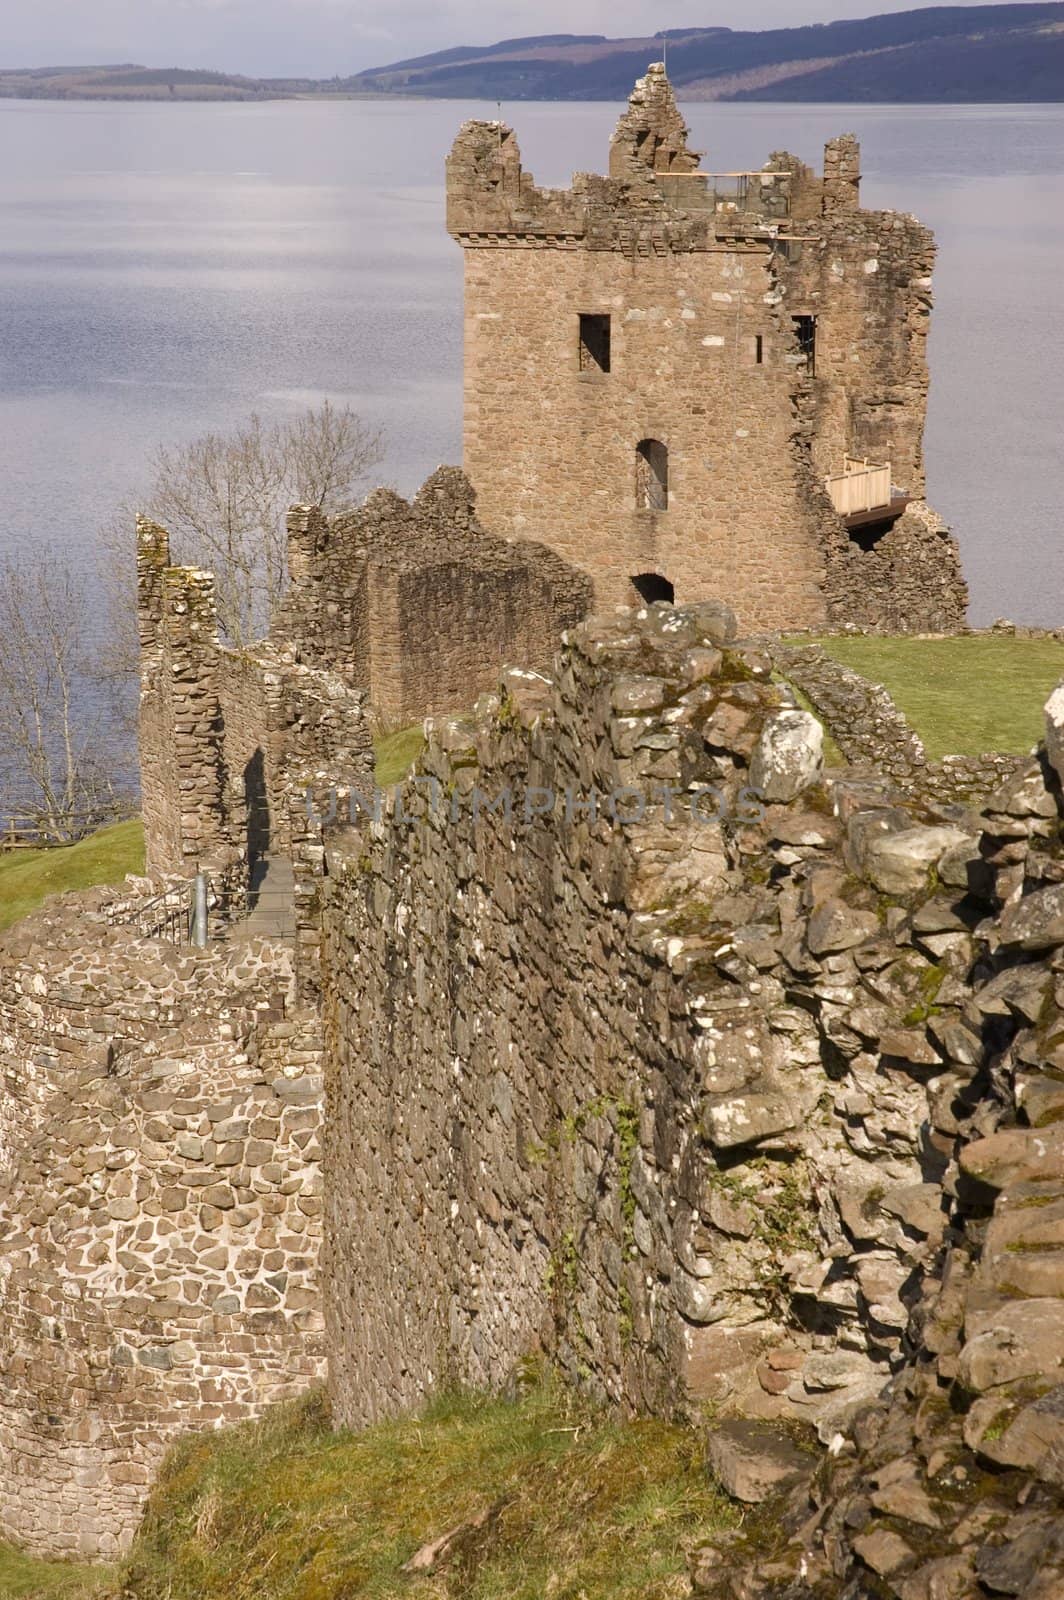 ruins of Urquhart Castle, one of Scotlands largest, at Loch Ness, owned and blownup in 1692 by the Clan Grant to stop it becoming a Jacobite stronghold.